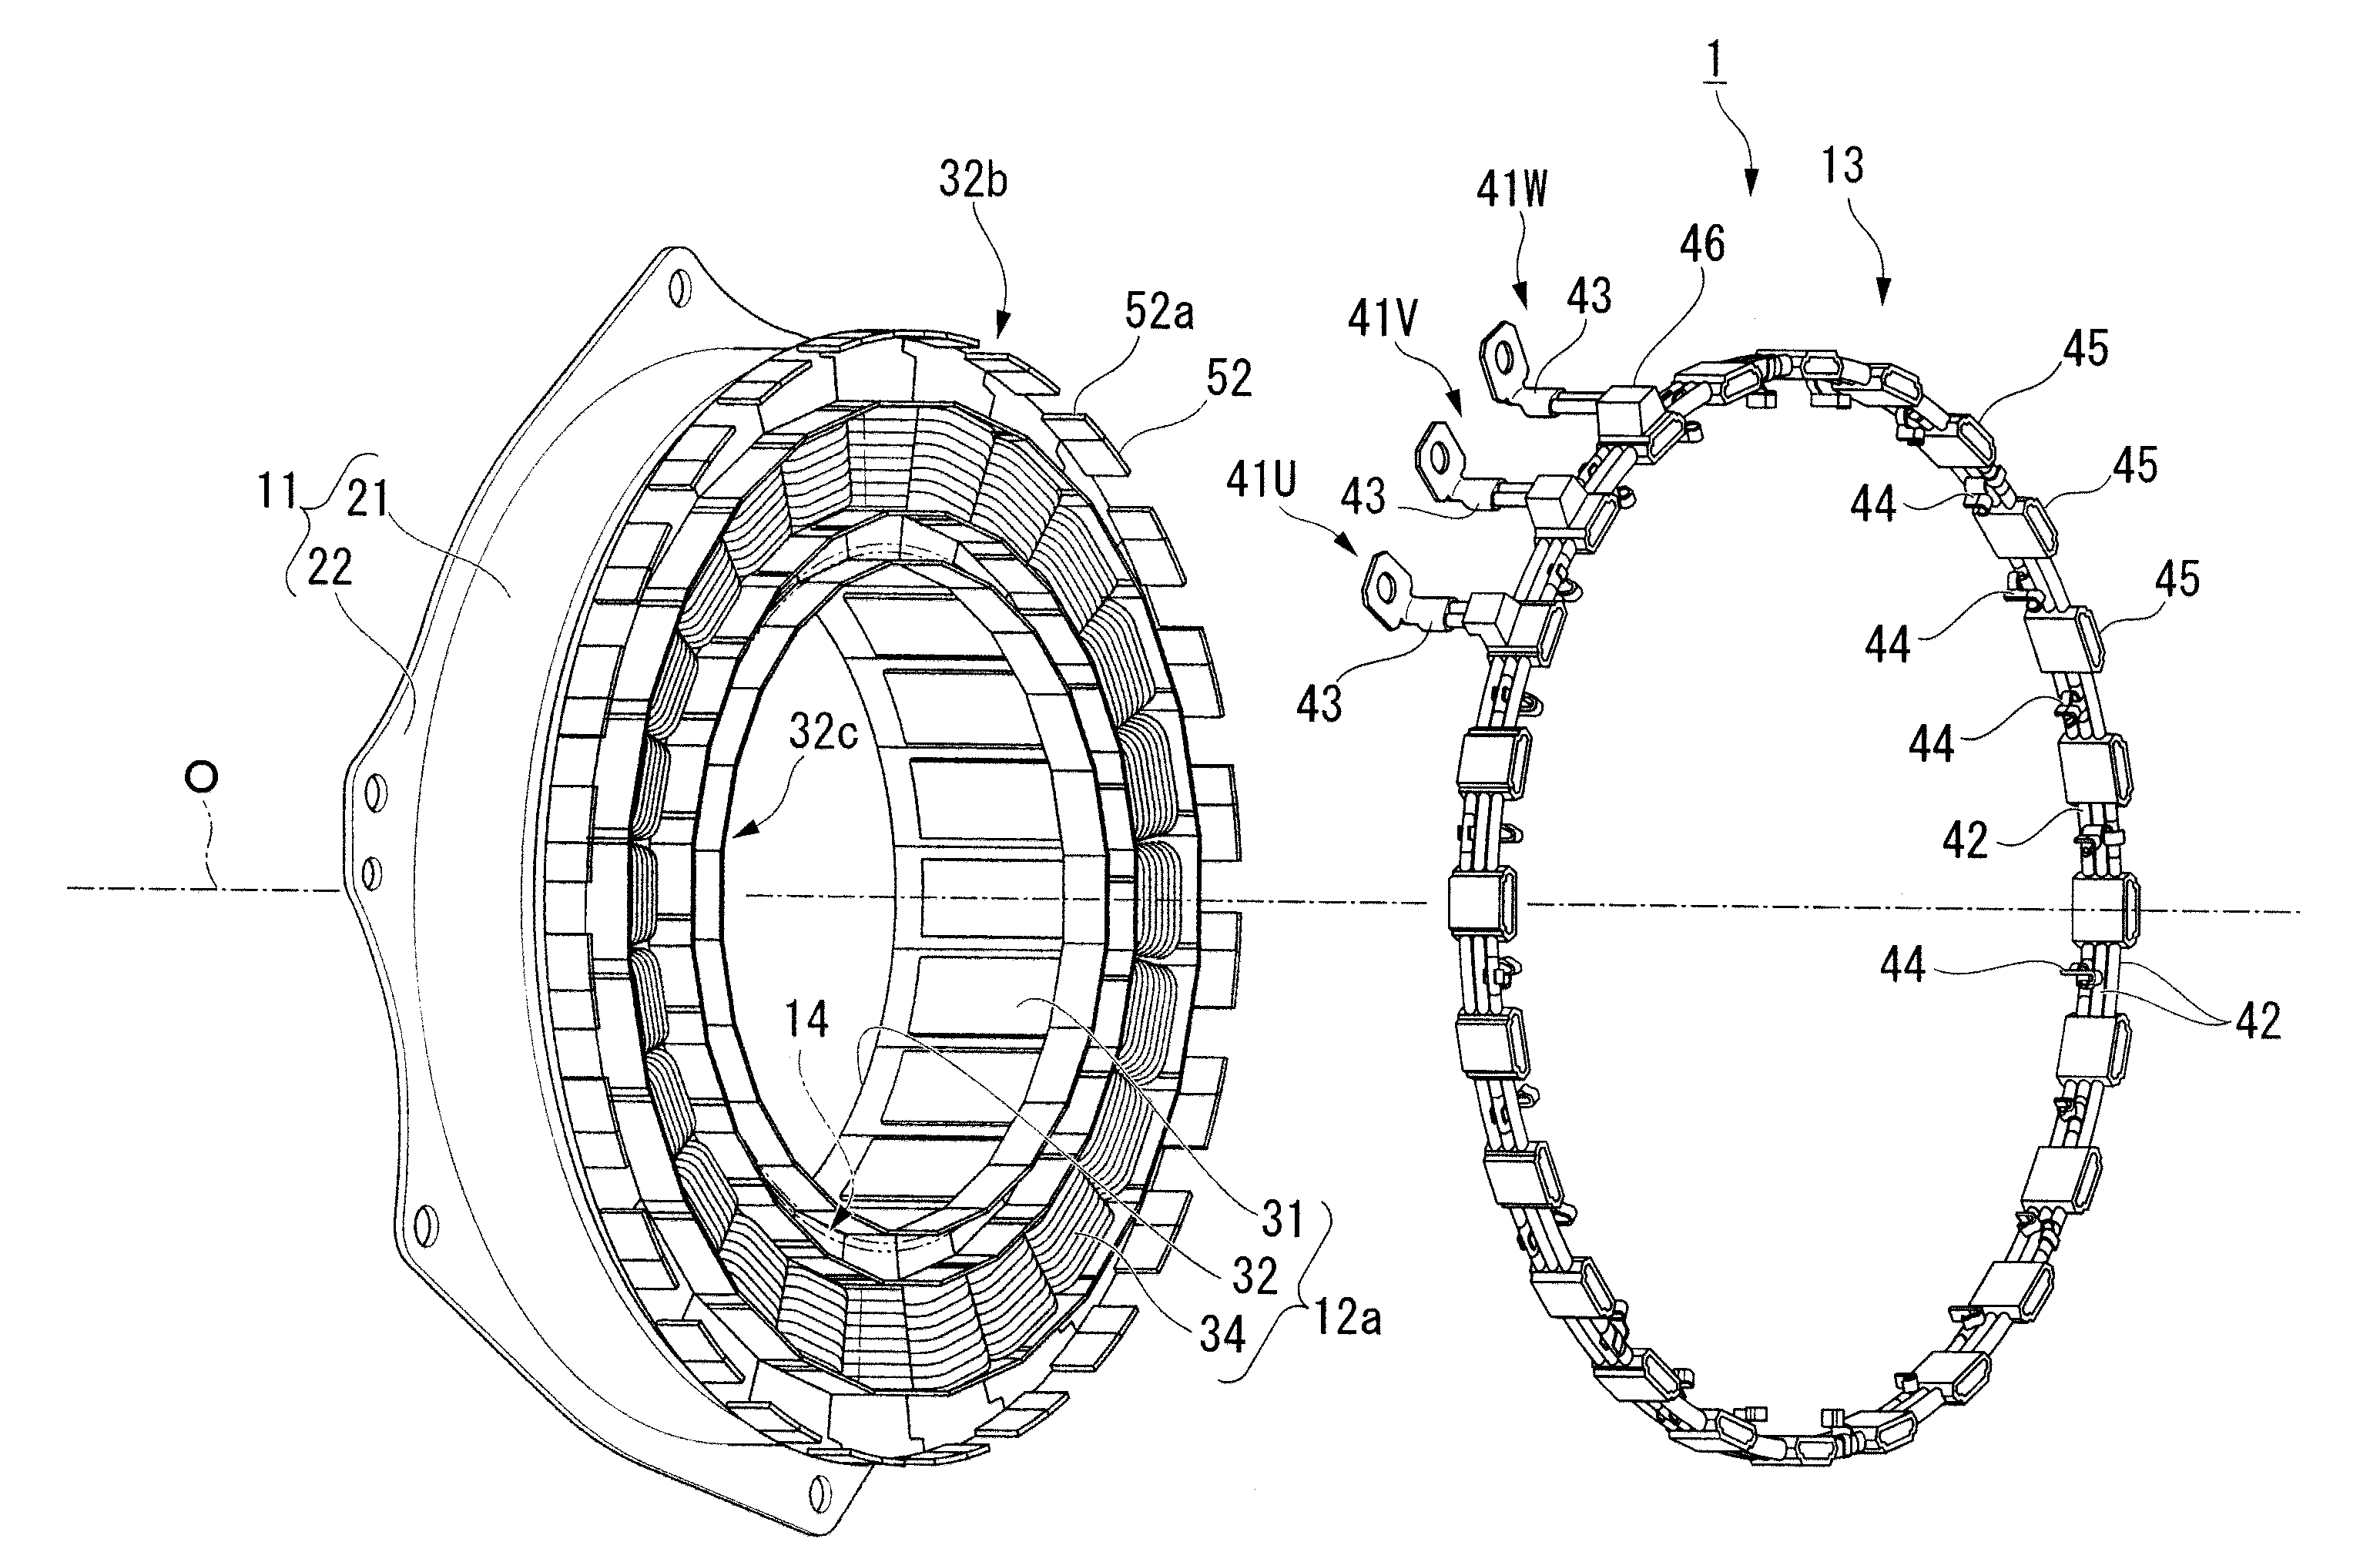 Electric power collection/distribution ring of rotary electric machine